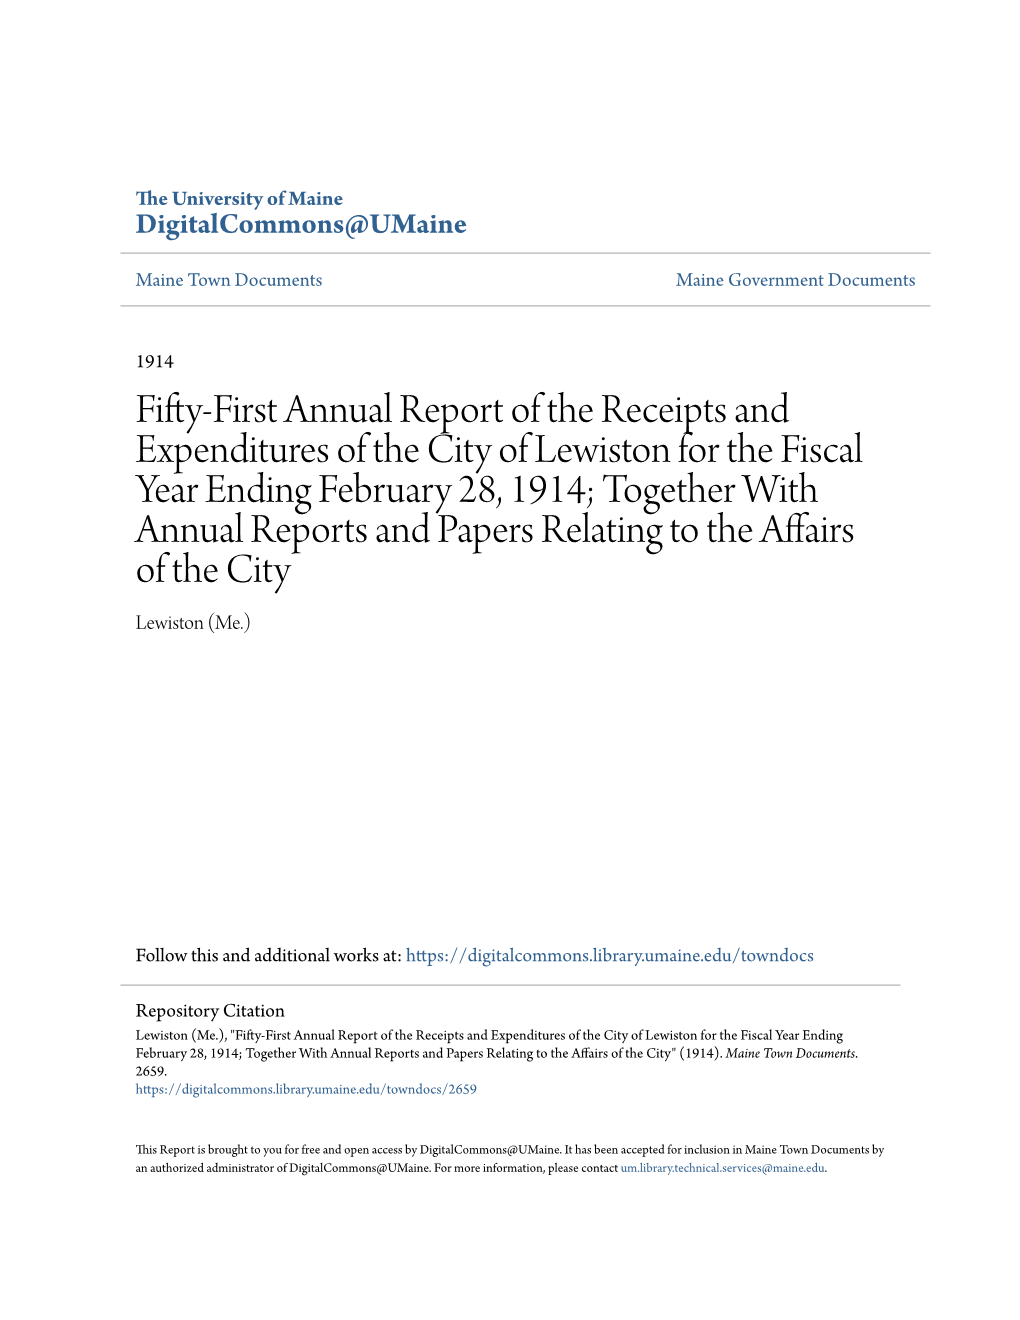 Fifty-First Annual Report of the Receipts and Expenditures of the City of Lewiston for the Fiscal Year Ending February 28, 1914;